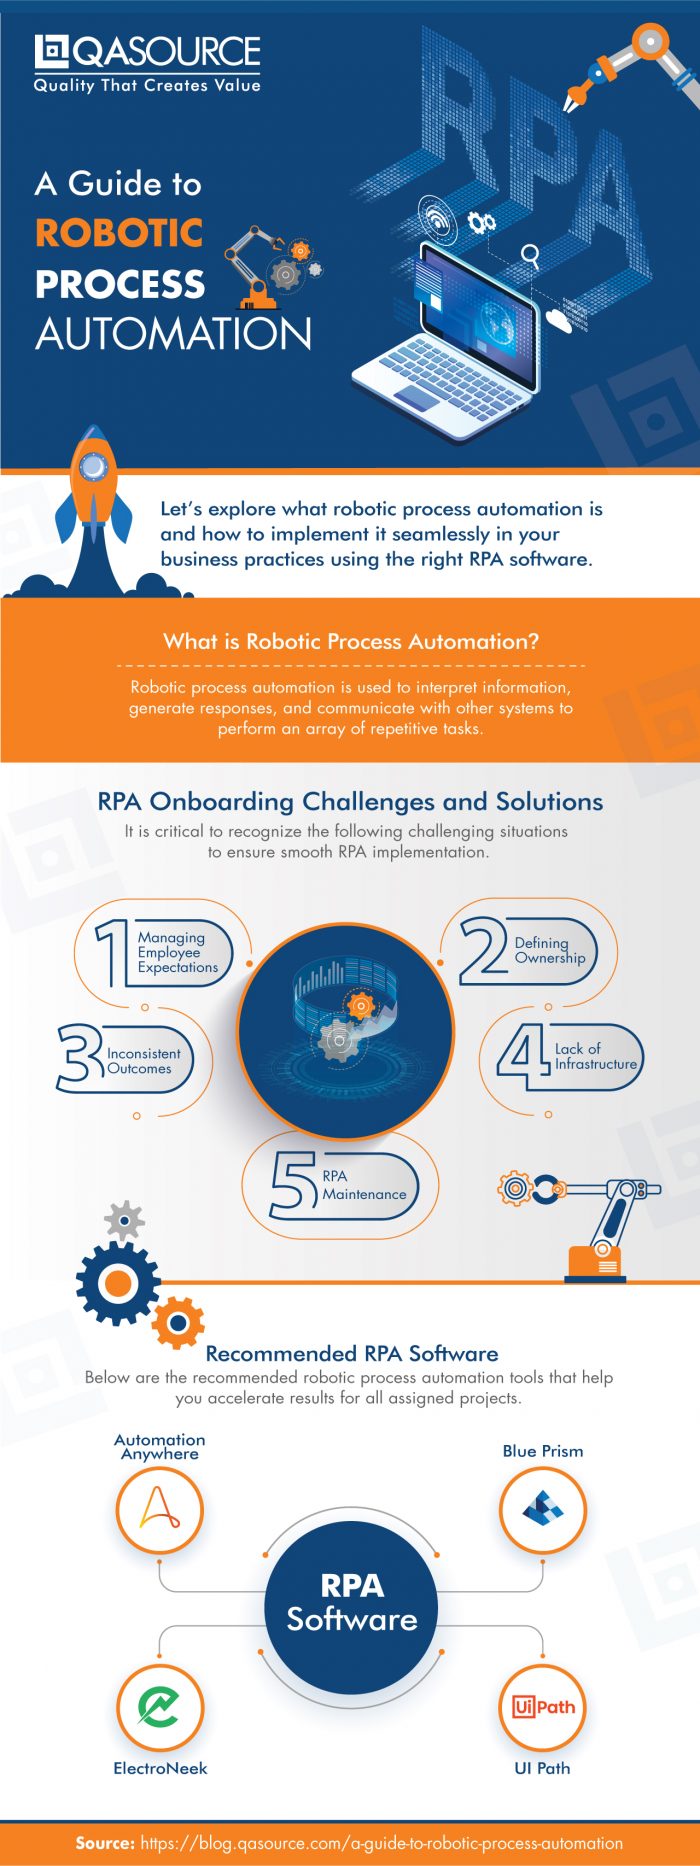 A Guide to Robotic Process Automation